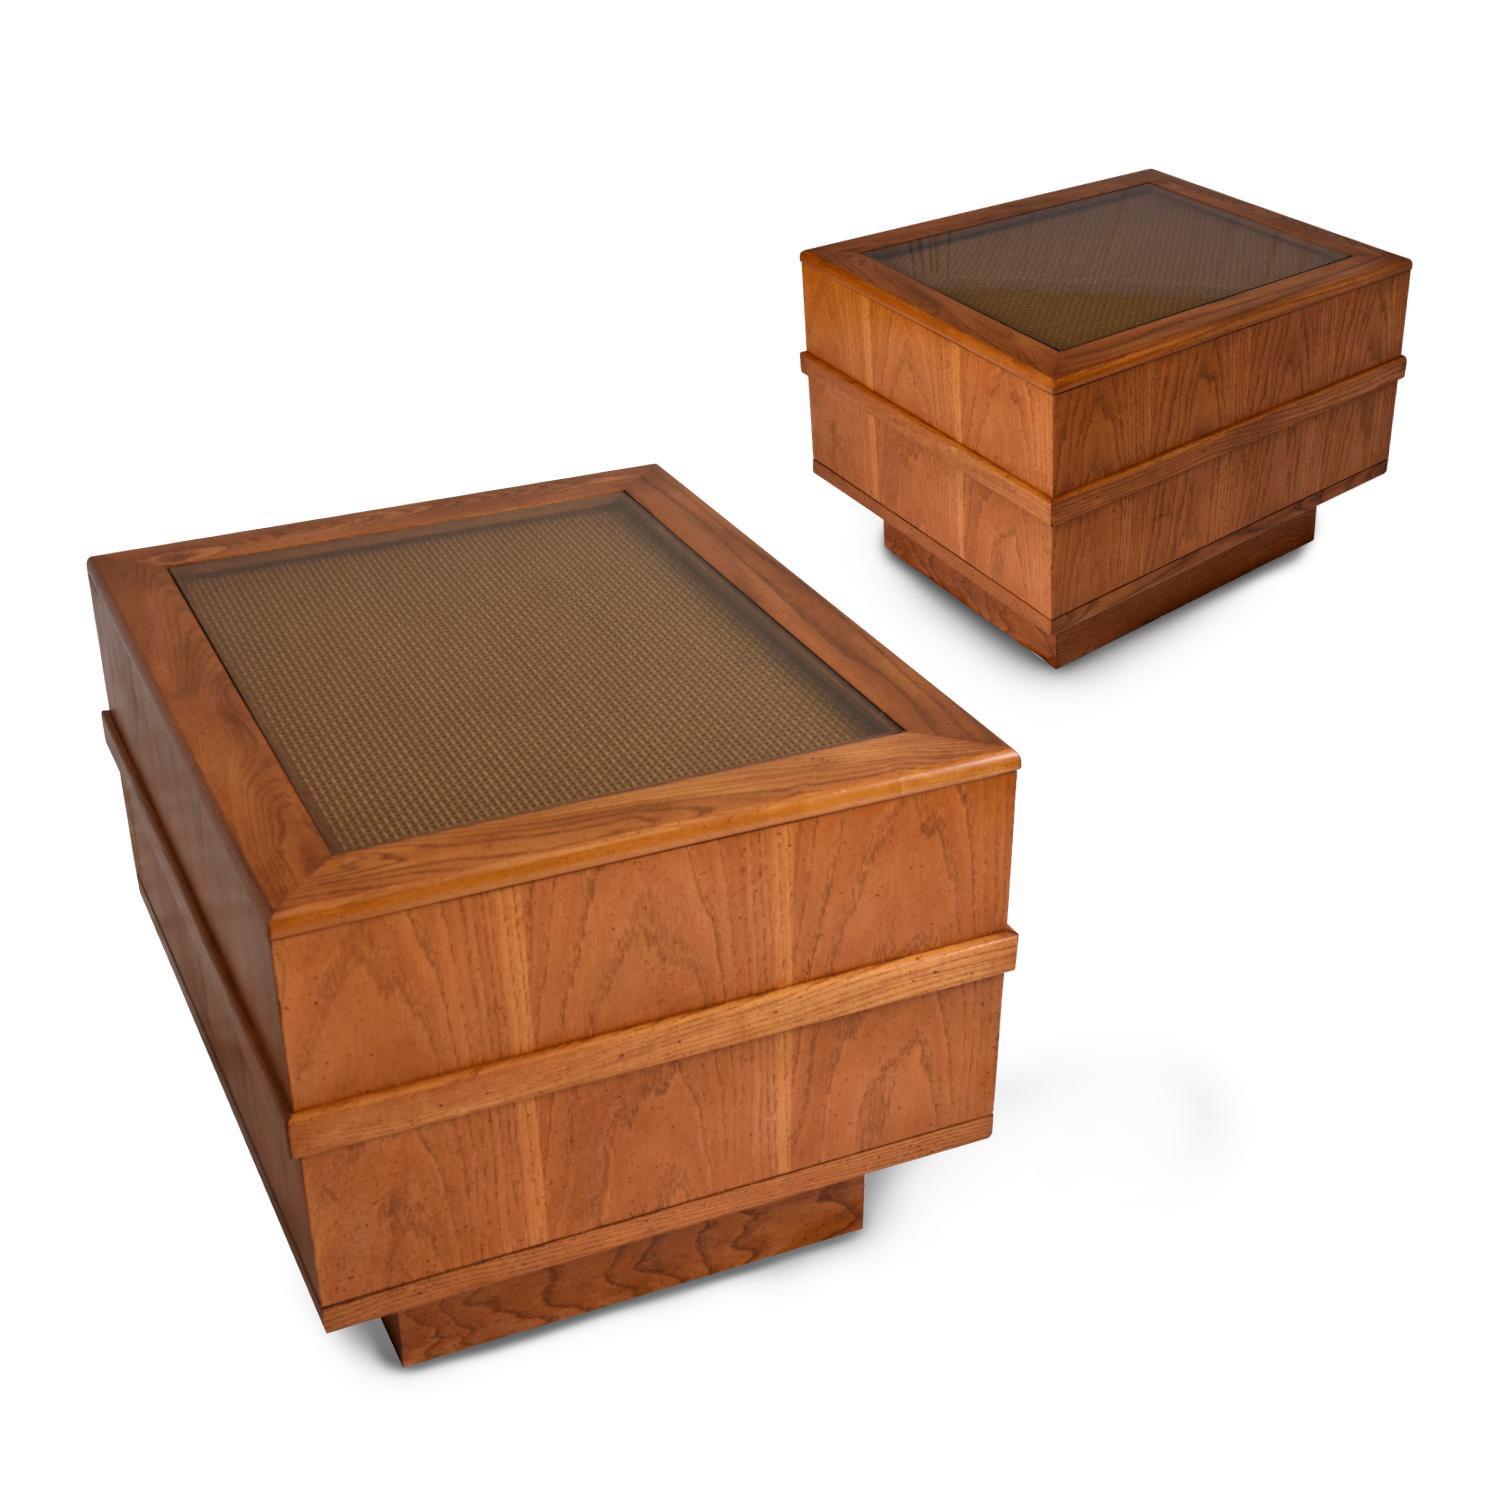 Pair of vintage 1970s monumental end tables with glass covered cane tops. The obtuse profile of these vintage tables speaks directly to the 1970s aesthetic. The large rectangular cubes are made of oak with an elegant fly speck finish. A single band